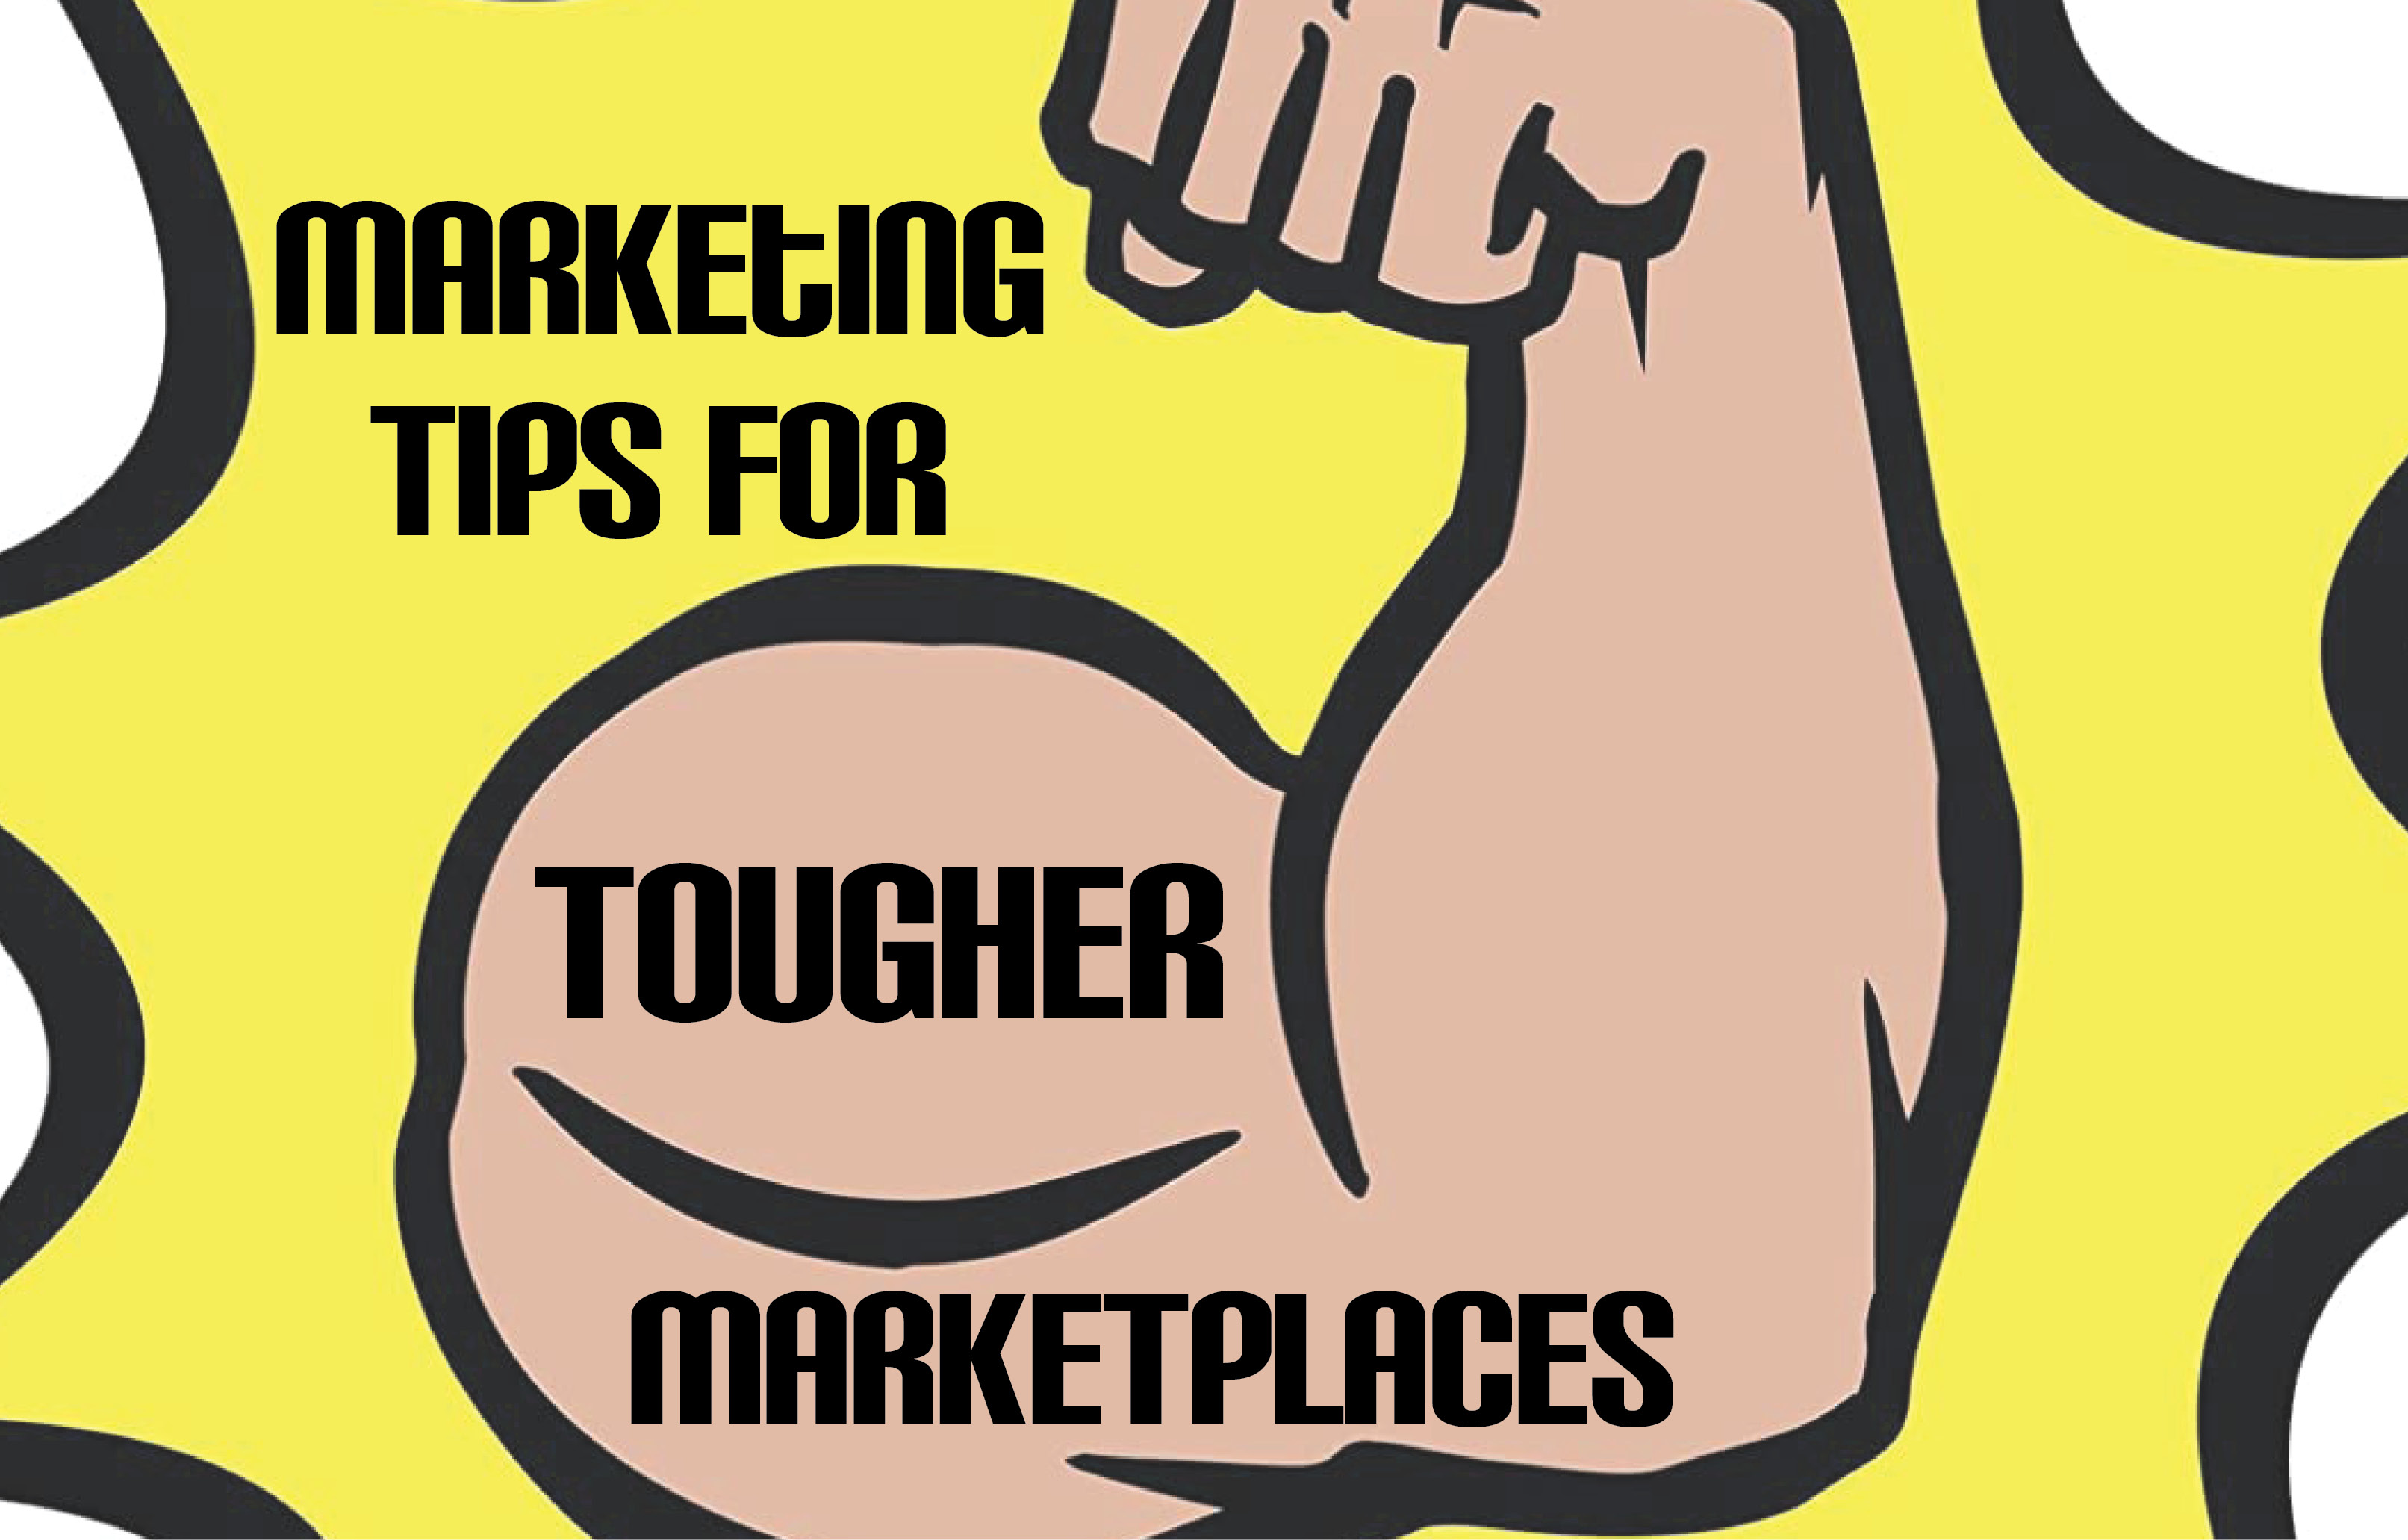 Marketing Tips For Tougher Marketplaces